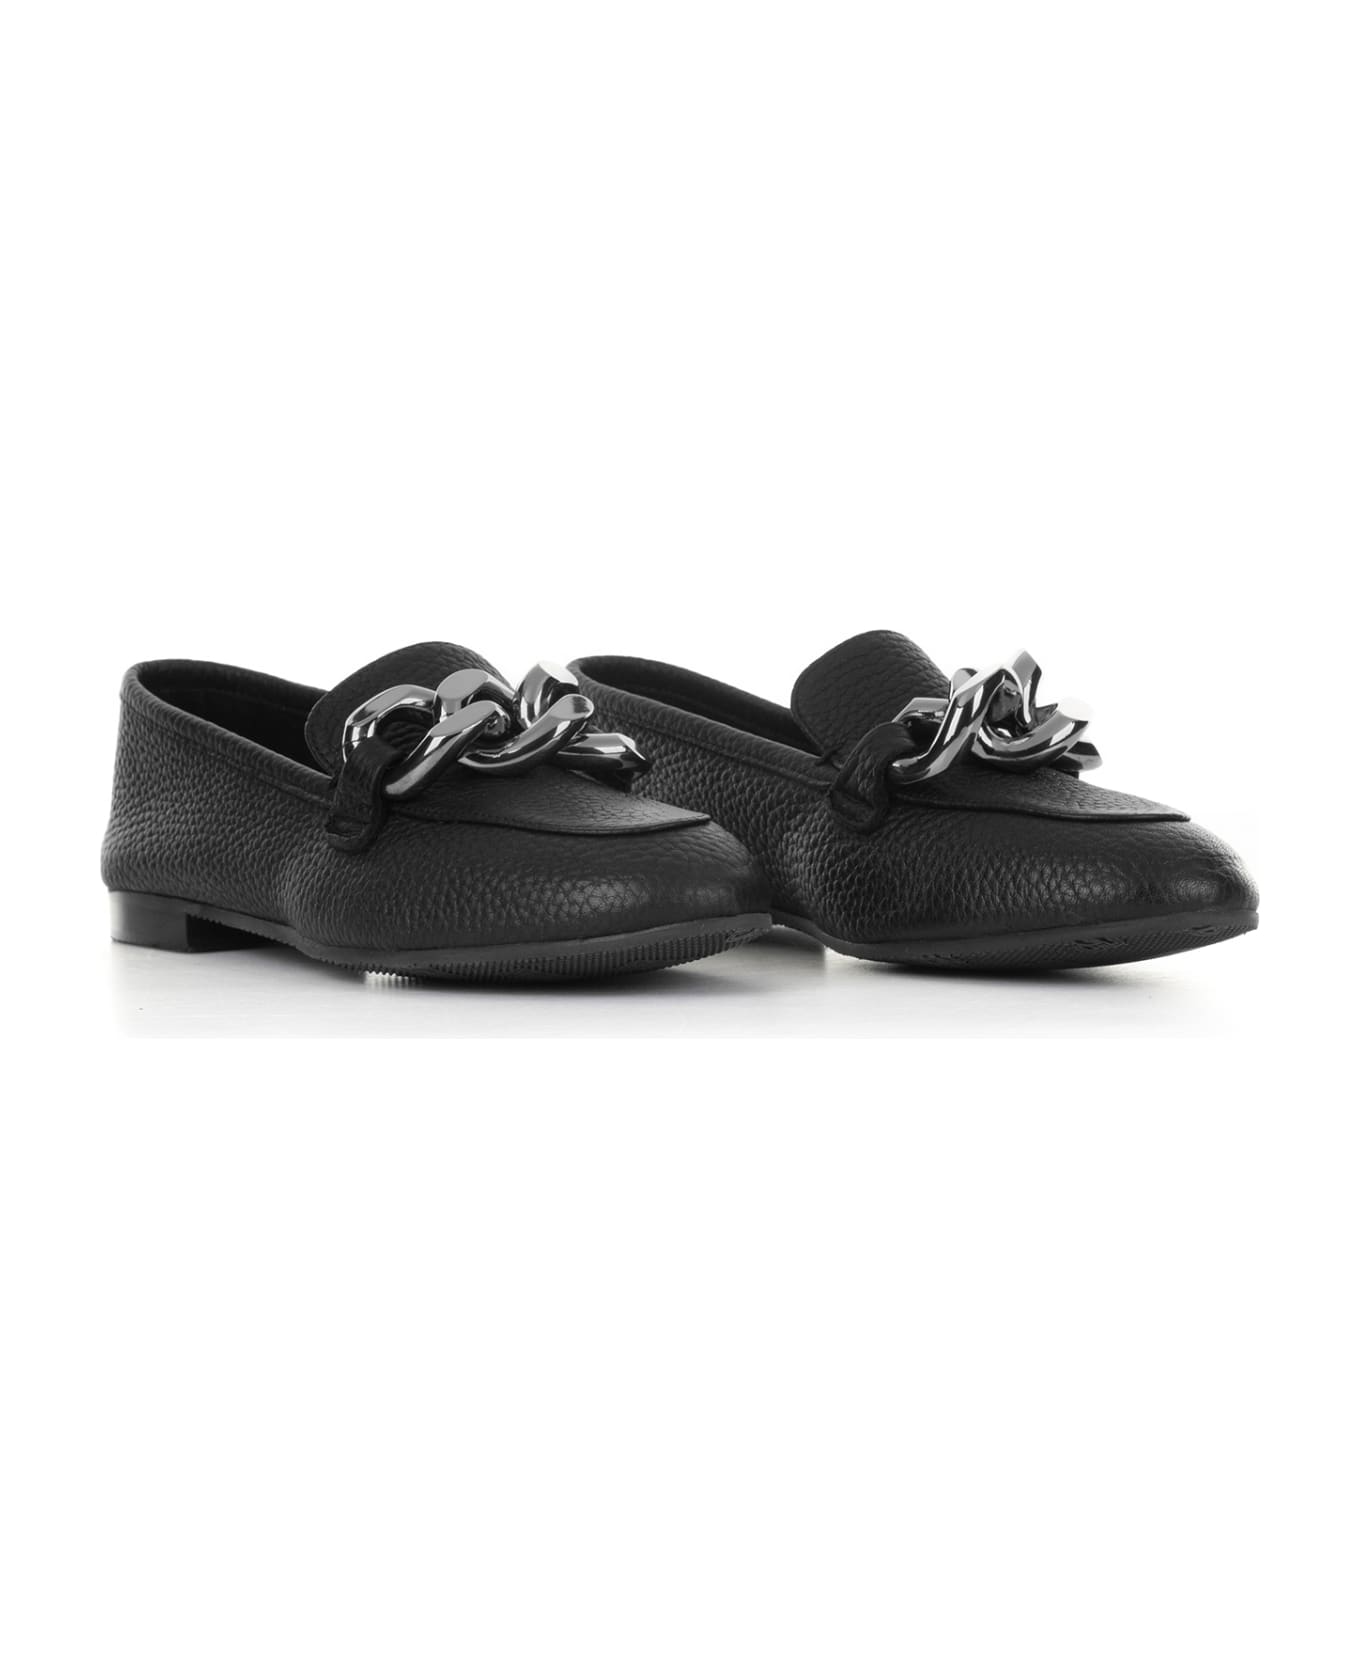 Casadei Hammered Leather Moccasin With Chain - NERO